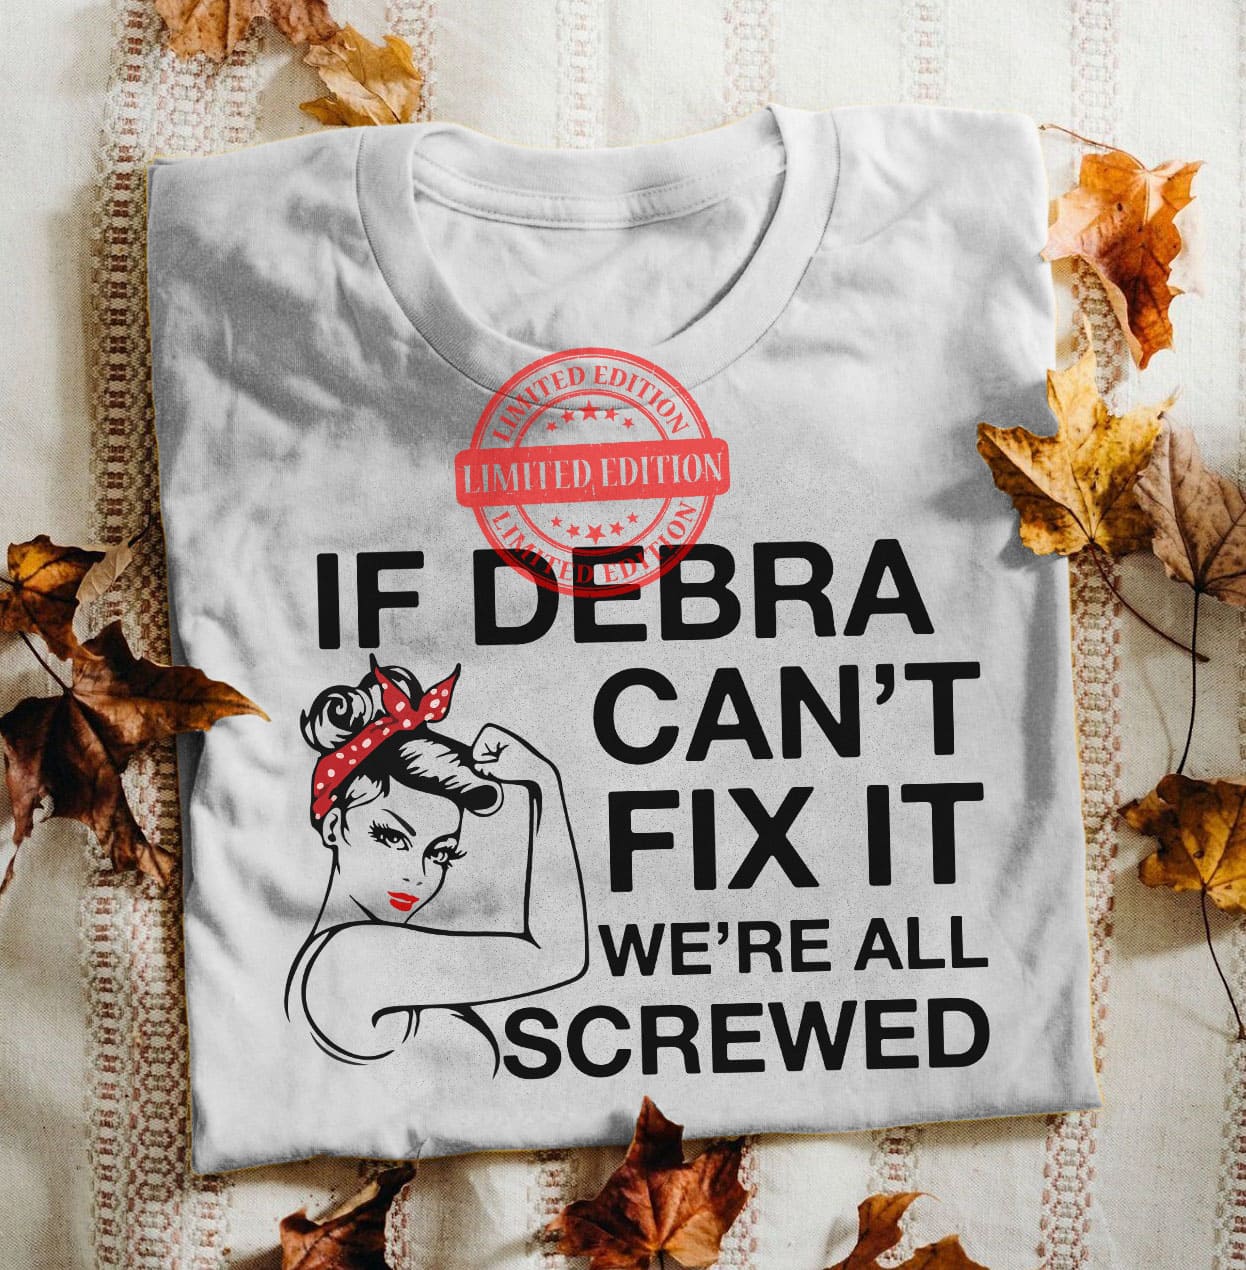 If Debra can't fix it, we're all screwed - Strong woman graphic T-shirt